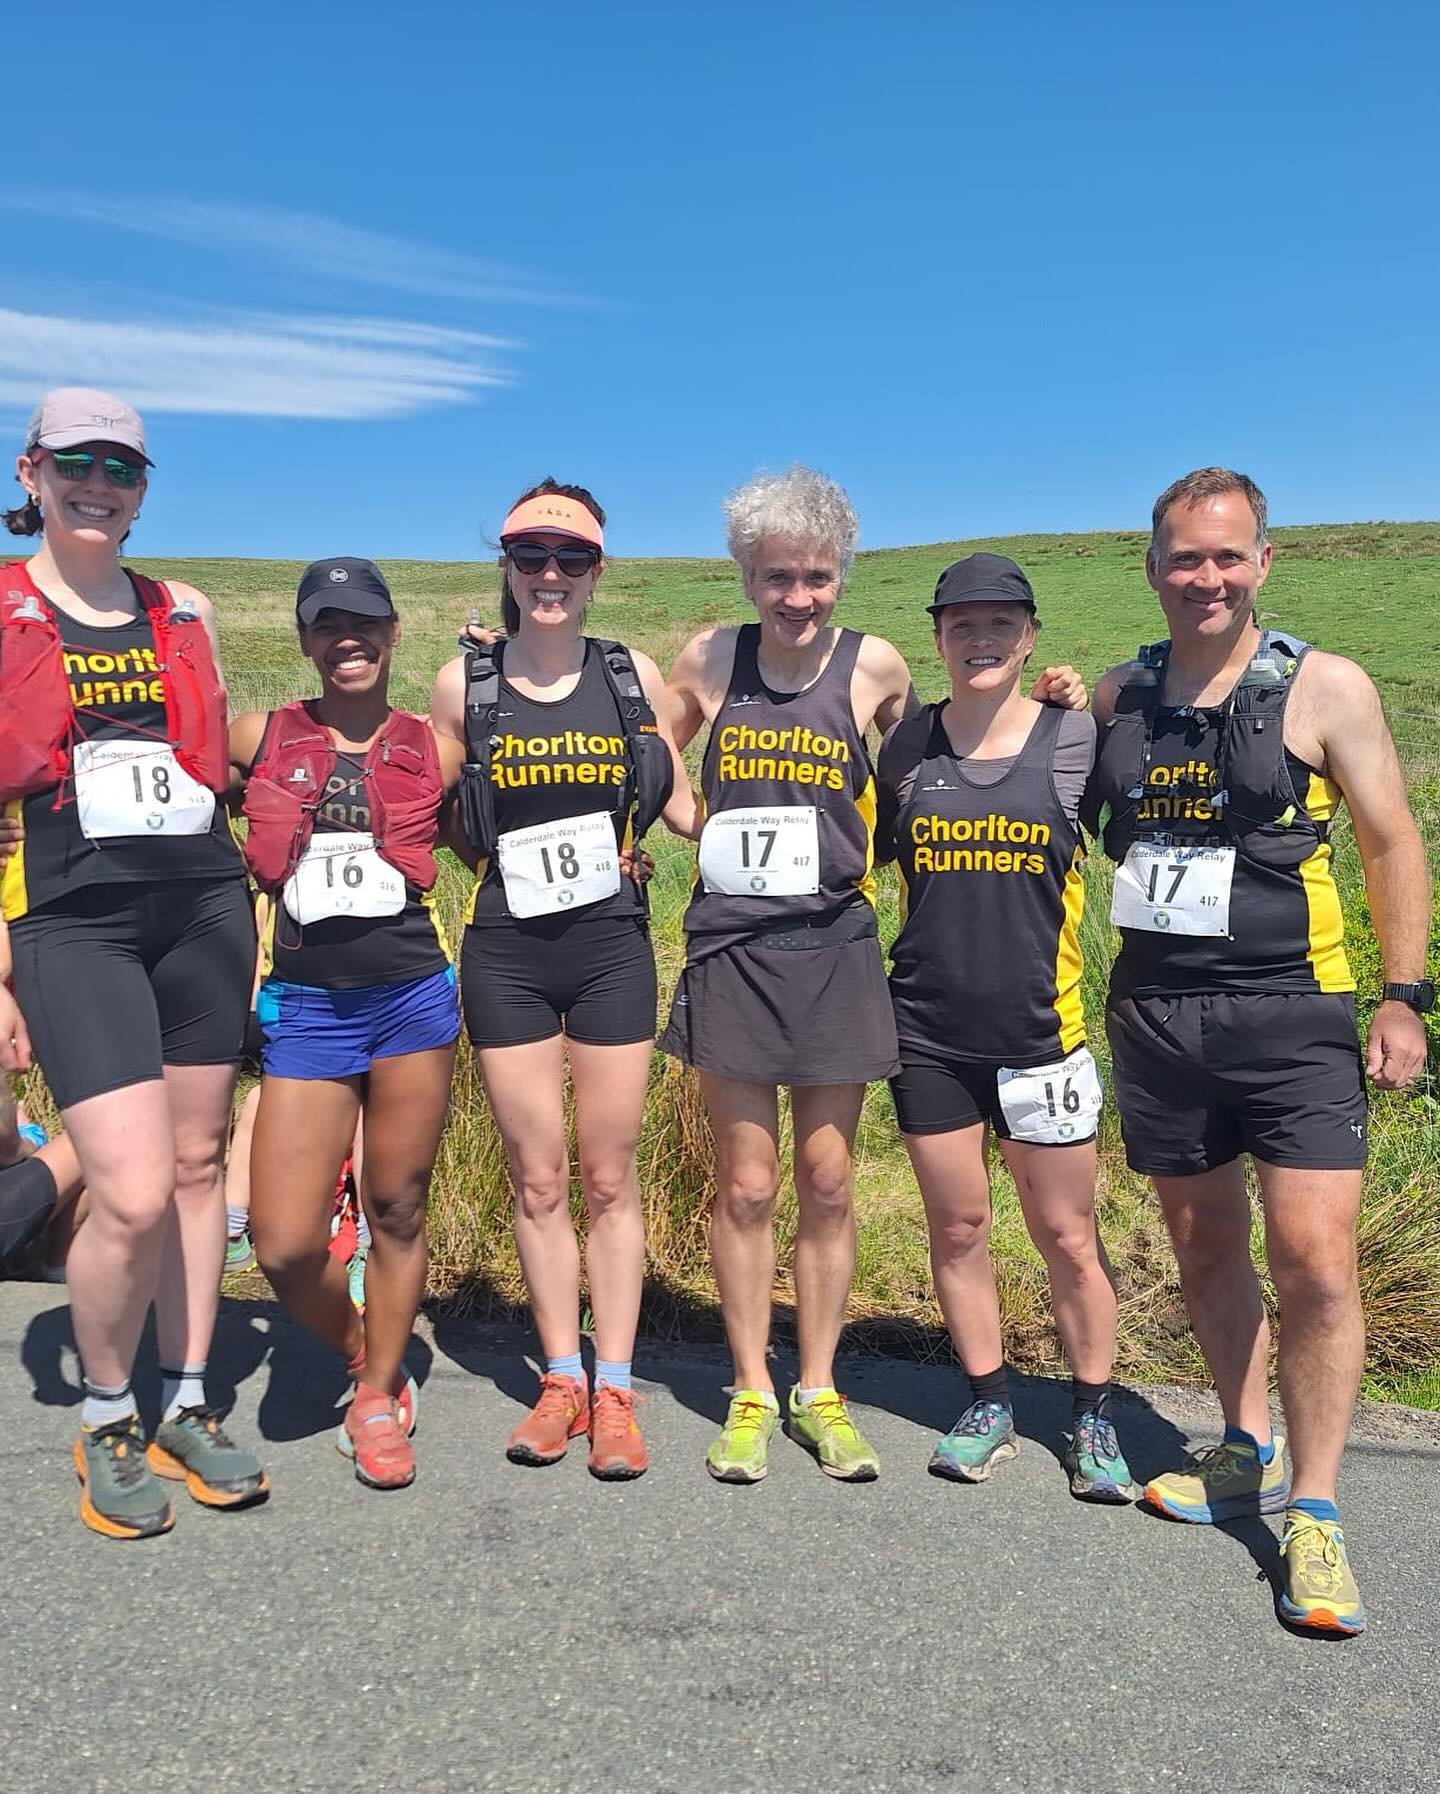 Well done to our runners out braving the heat at the Calderdale Relays! 🖤 💛 

A 6 leg relay down the Calderdale Way starting in West Vale and finishing at Spring Hall in Halifax! 

#chorltonrunners #calderdalewayrelay